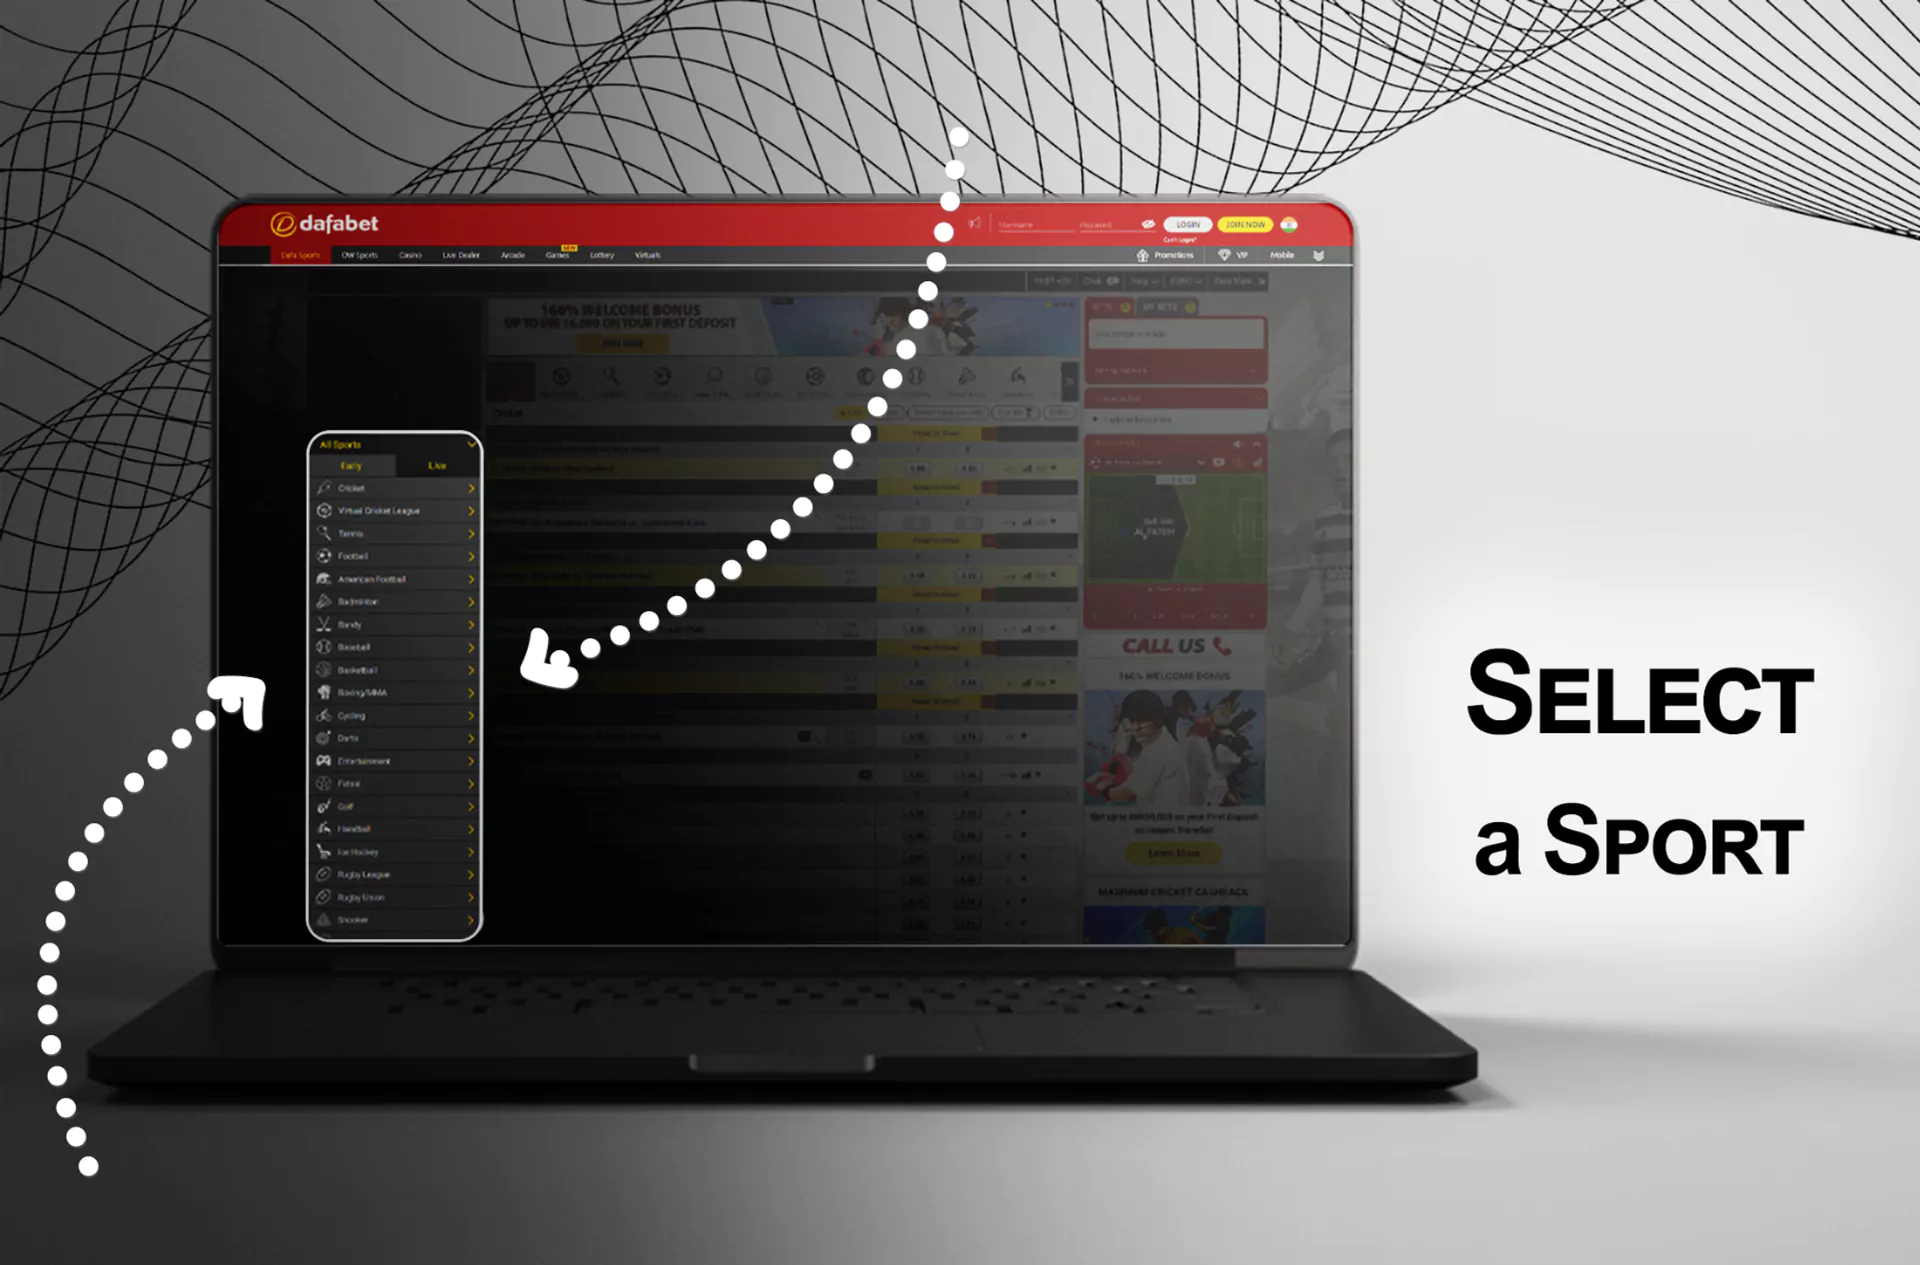 Look through the sports list at the site and choose the section you want to place a bet in.